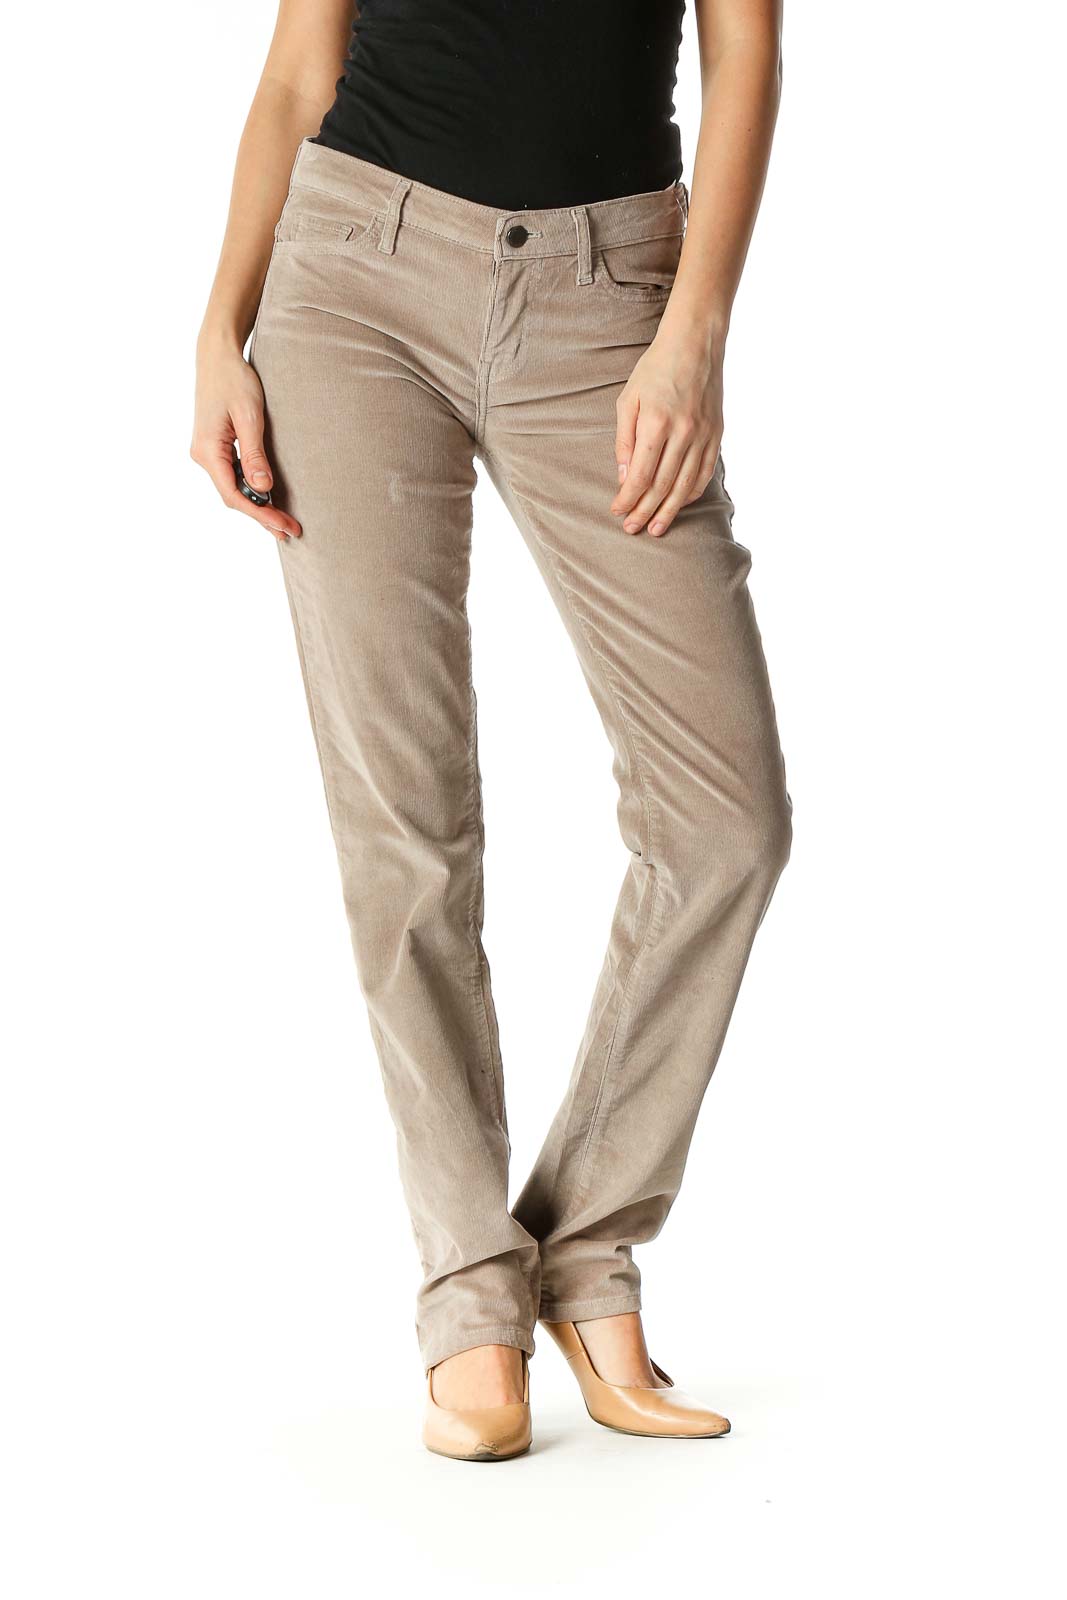 Brown Solid Casual Trousers Front